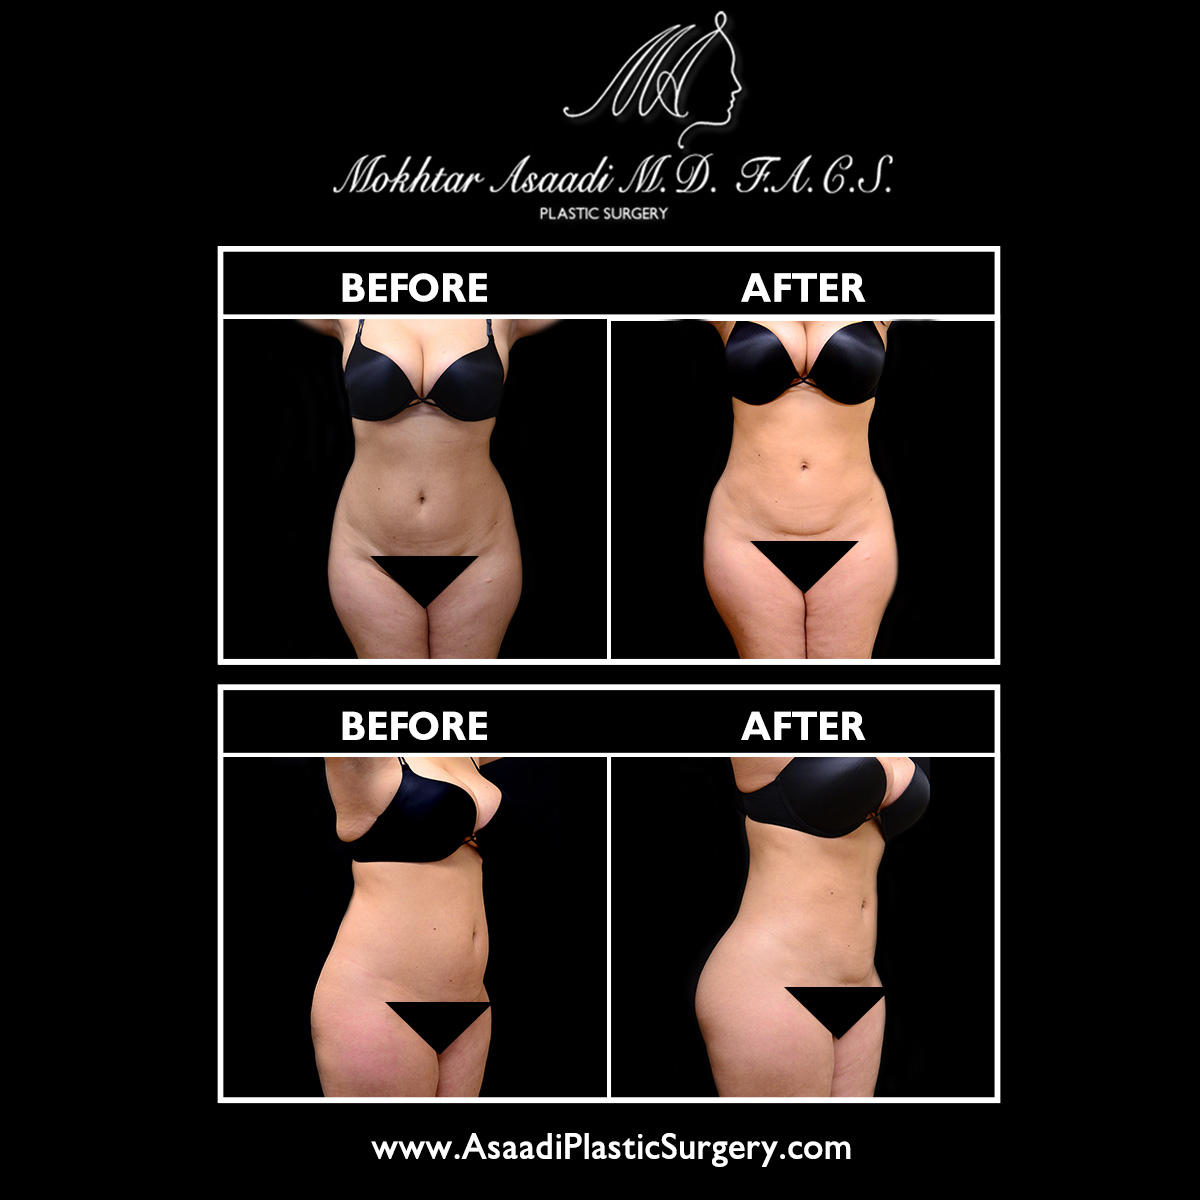 Liposuction in NJ can create awe-inspiring results. In this case, Dr. Asaadi performed liposuction of the abdomen, flanks, and back.